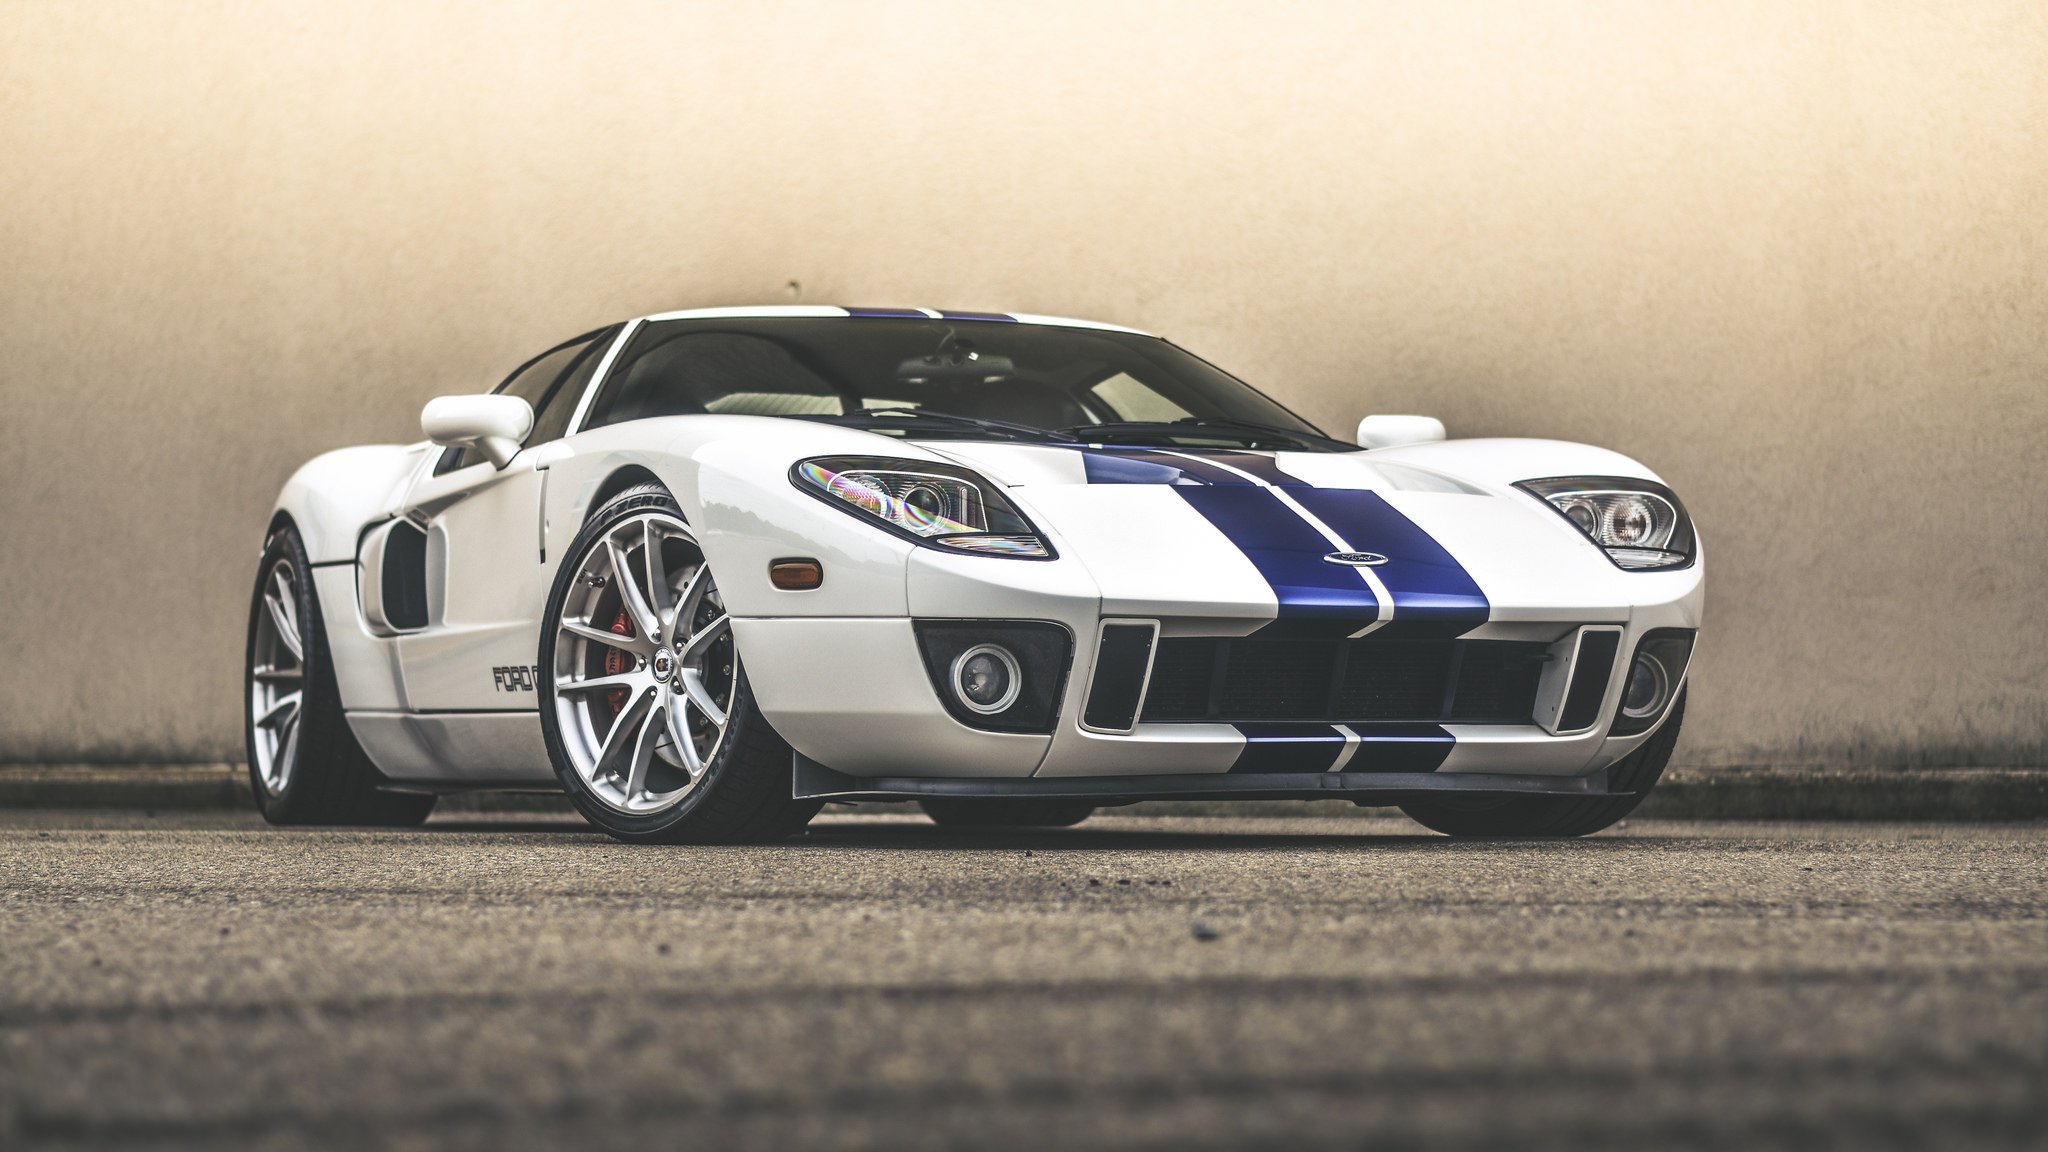 Custom White Ford GT with Blue Stripes - Photo by HRE Wheels